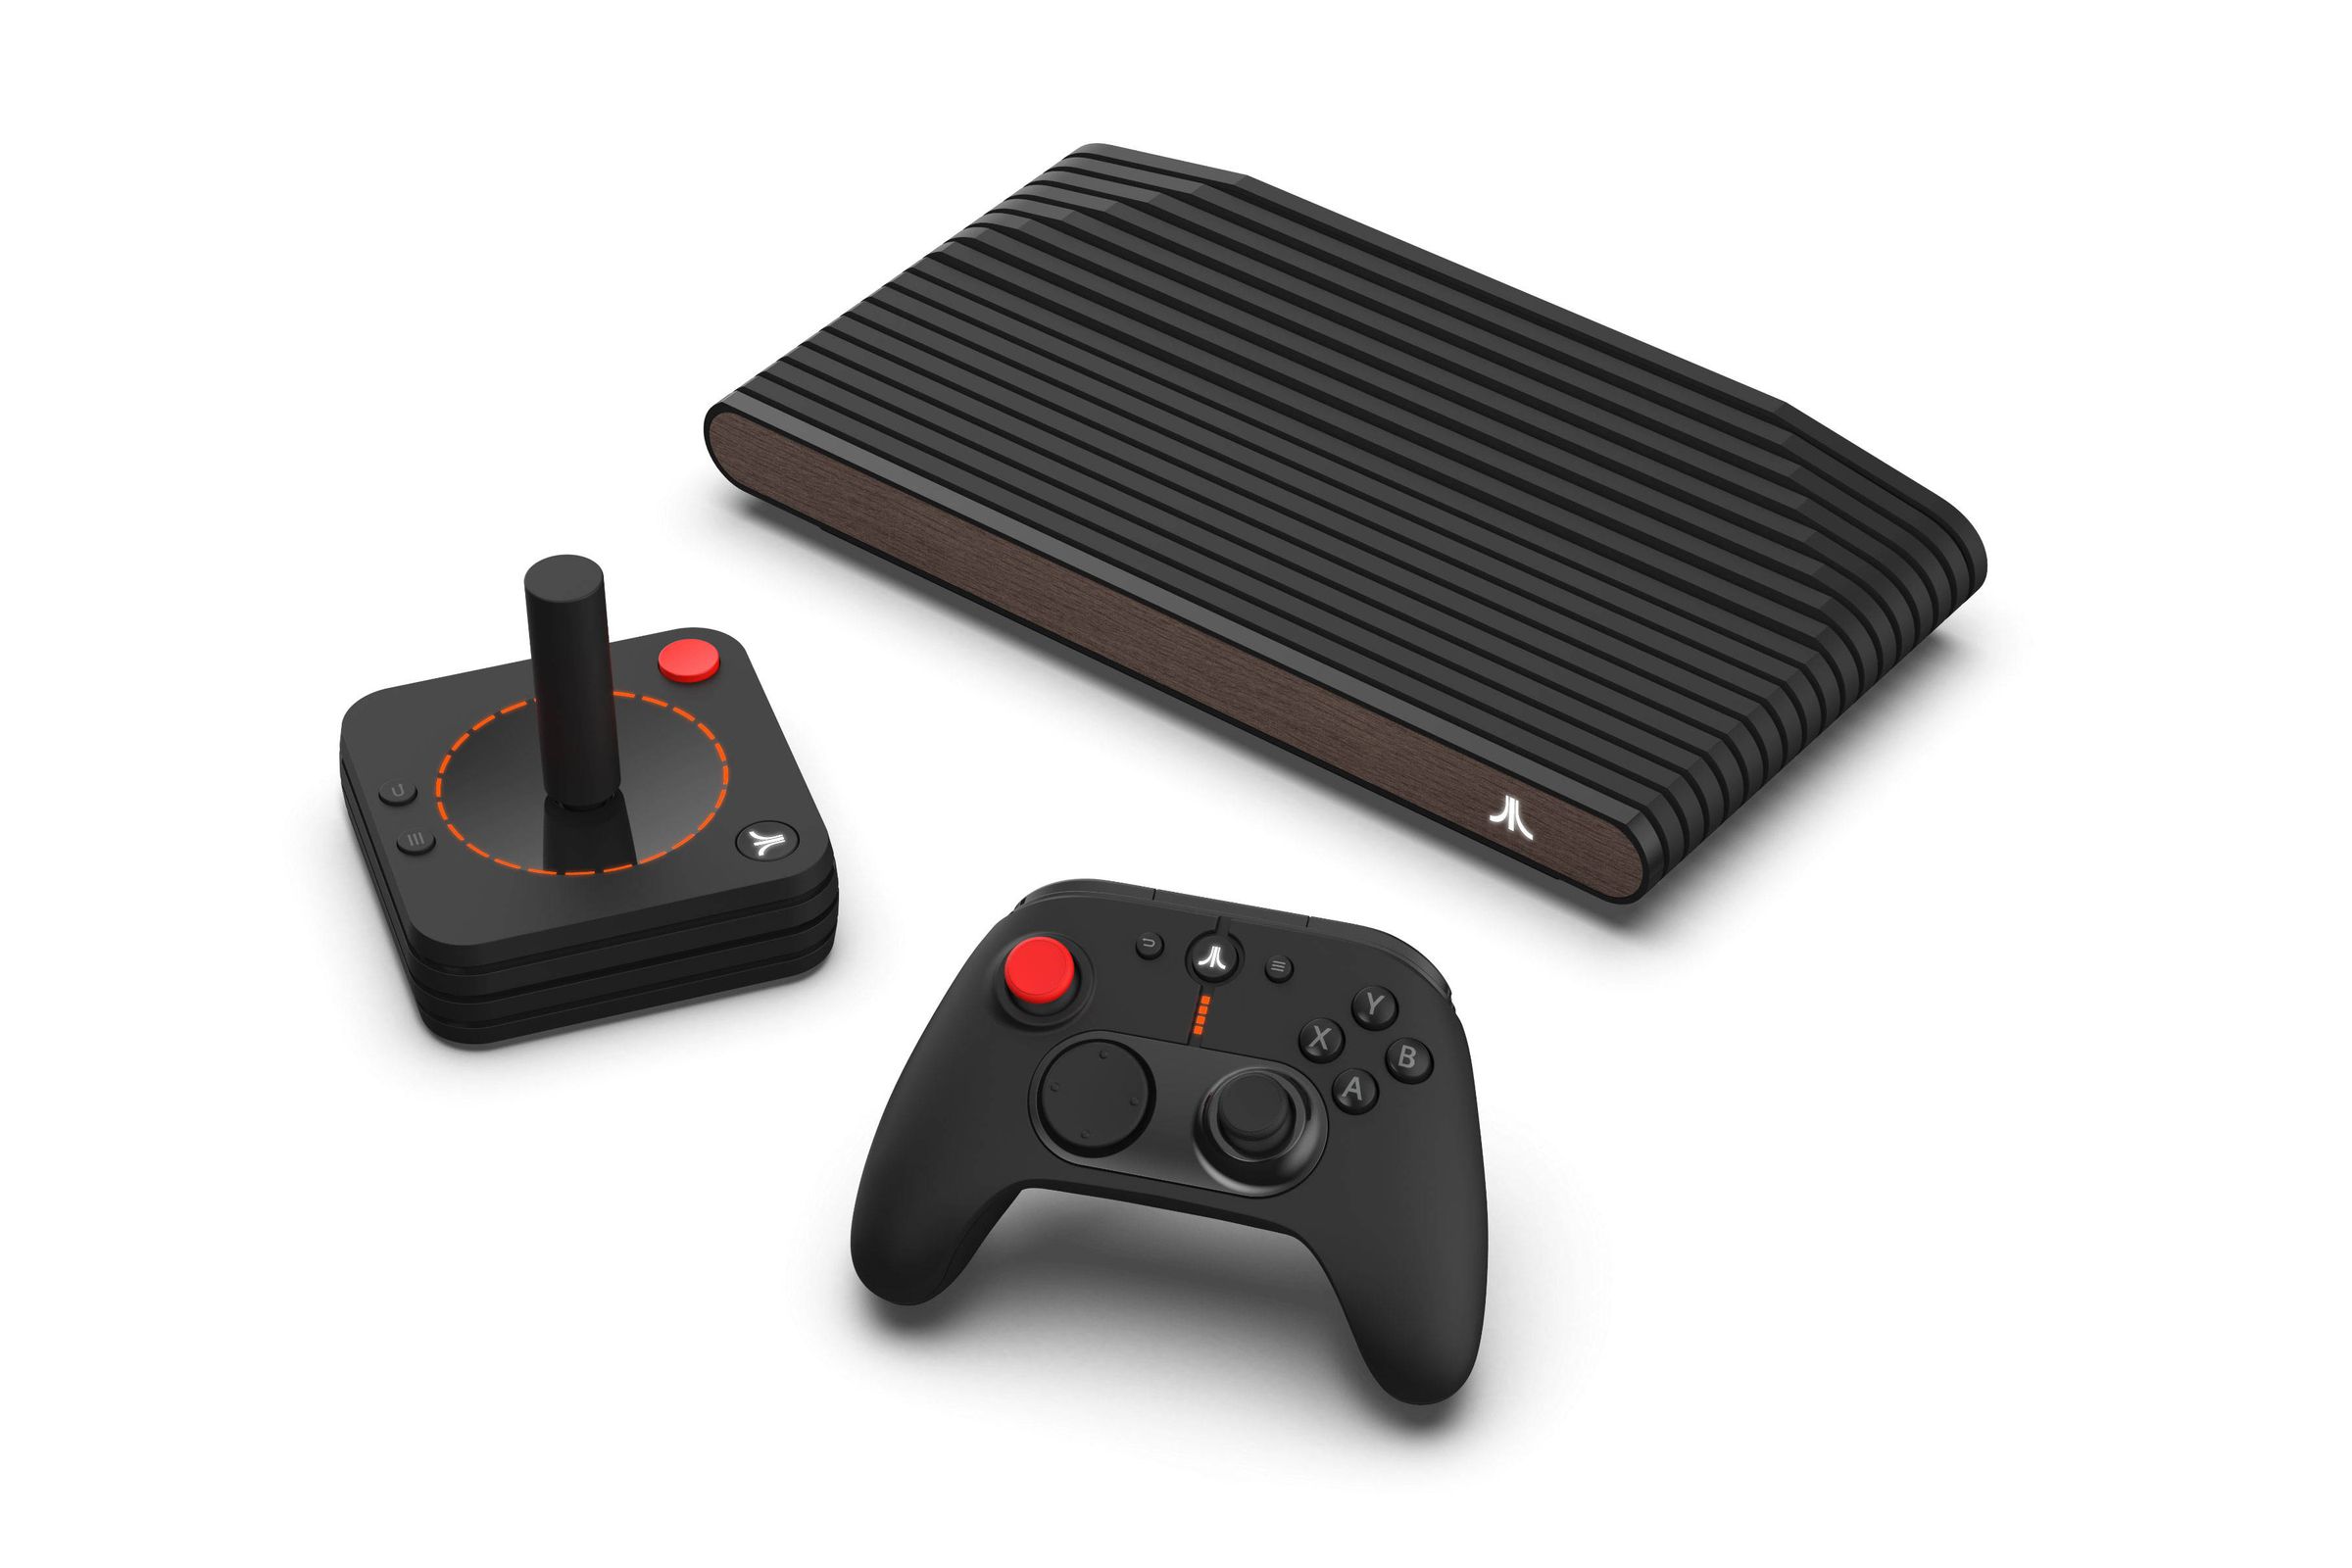 The “Black Walnut” version of the console, which comes with a joystick and controller.